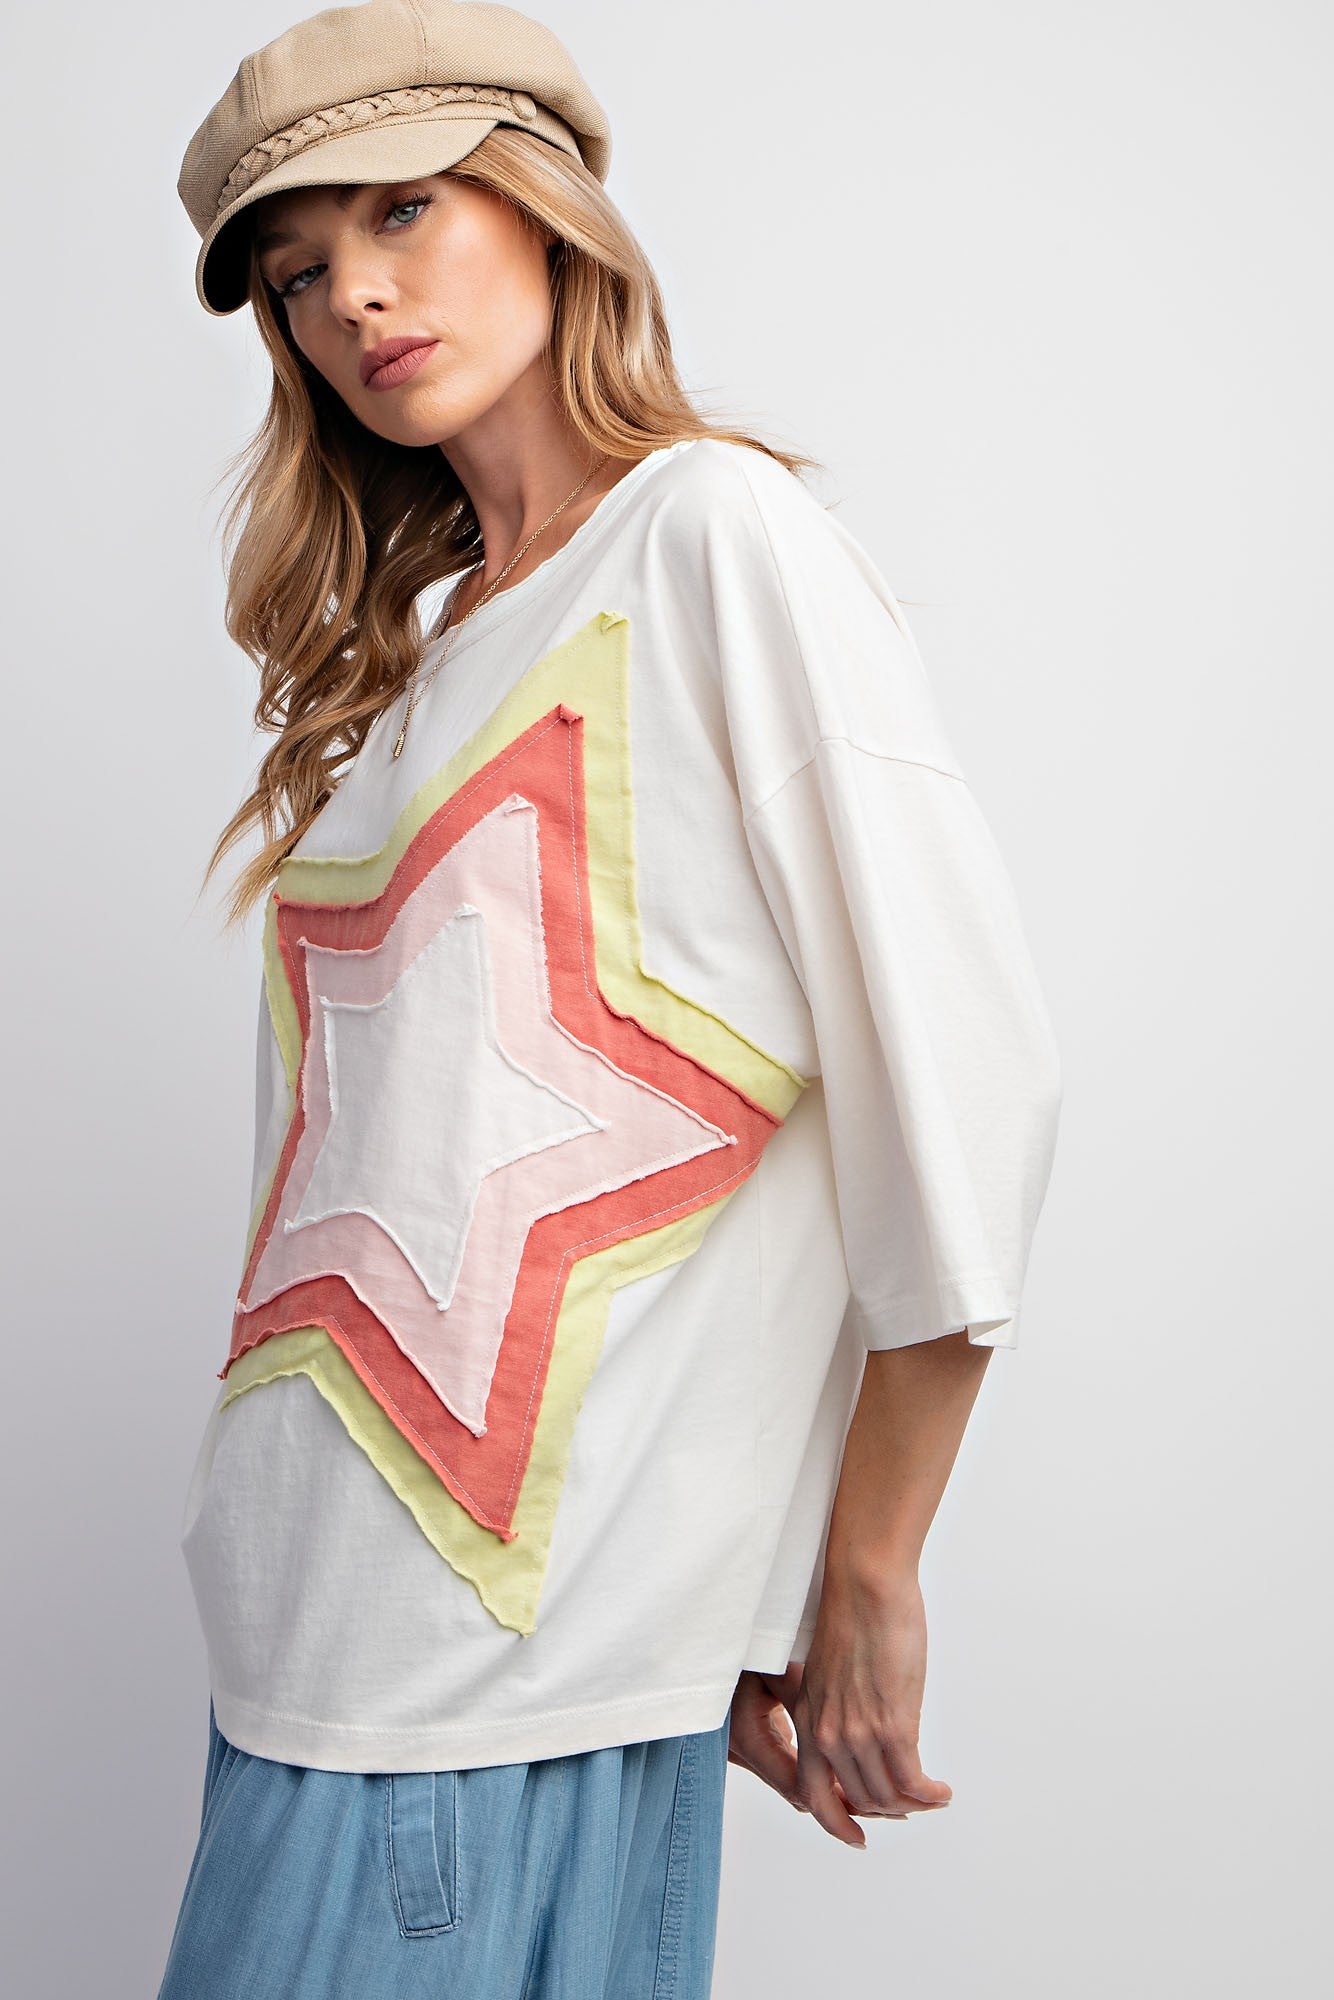 Easel Front Star Patched Half Sleeve Top in Off White – June Adel